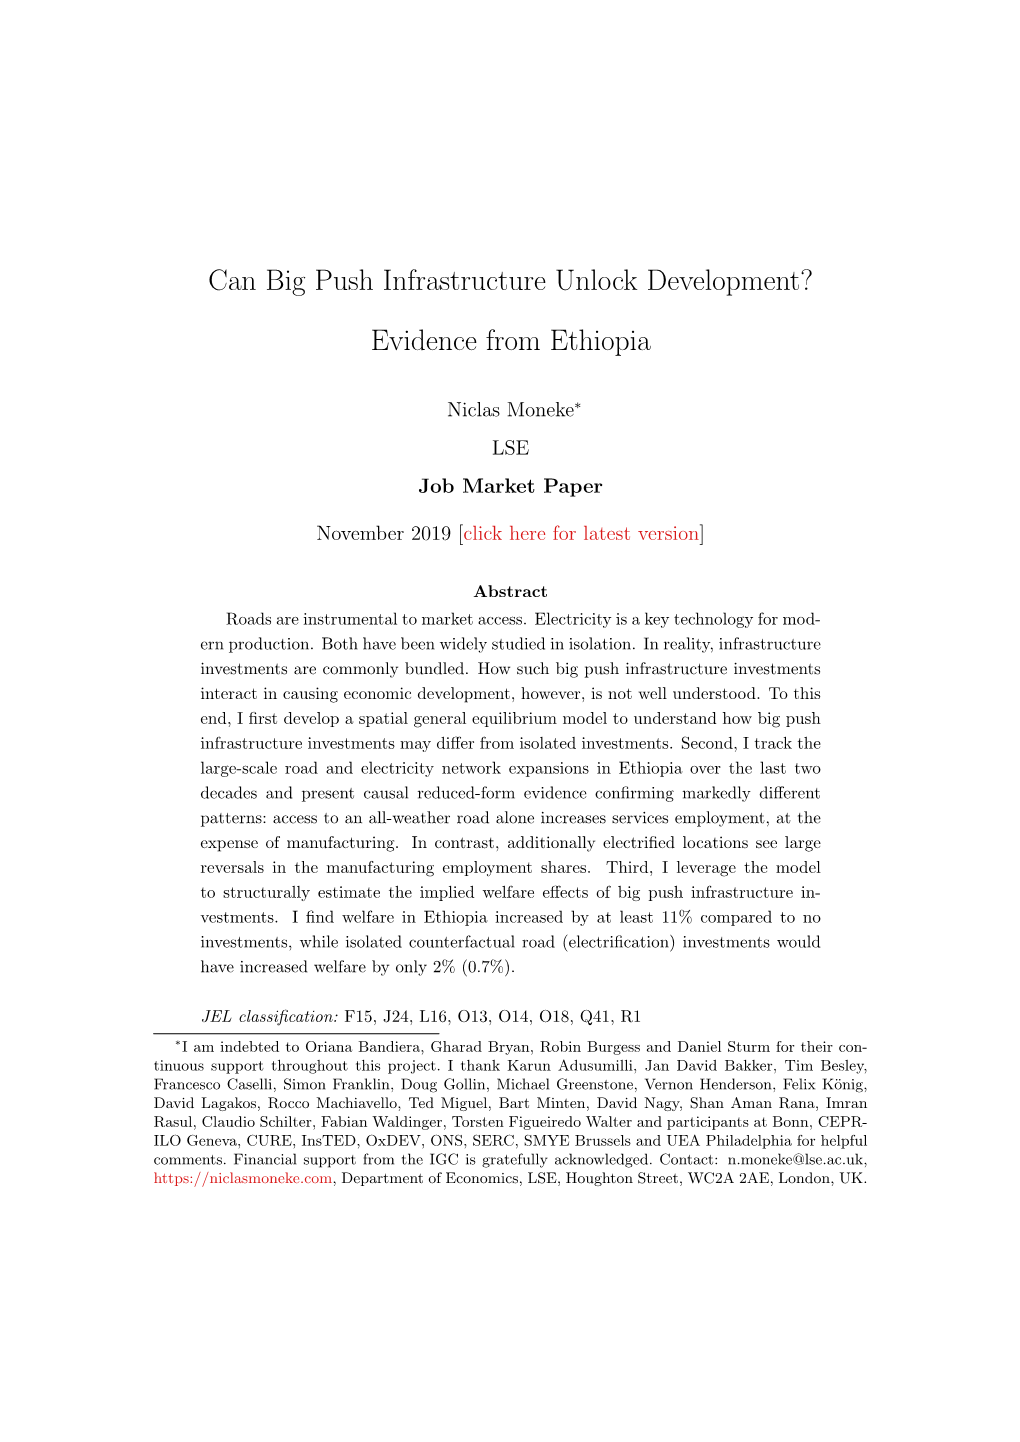 Can Big Push Infrastructure Unlock Development? Evidence From